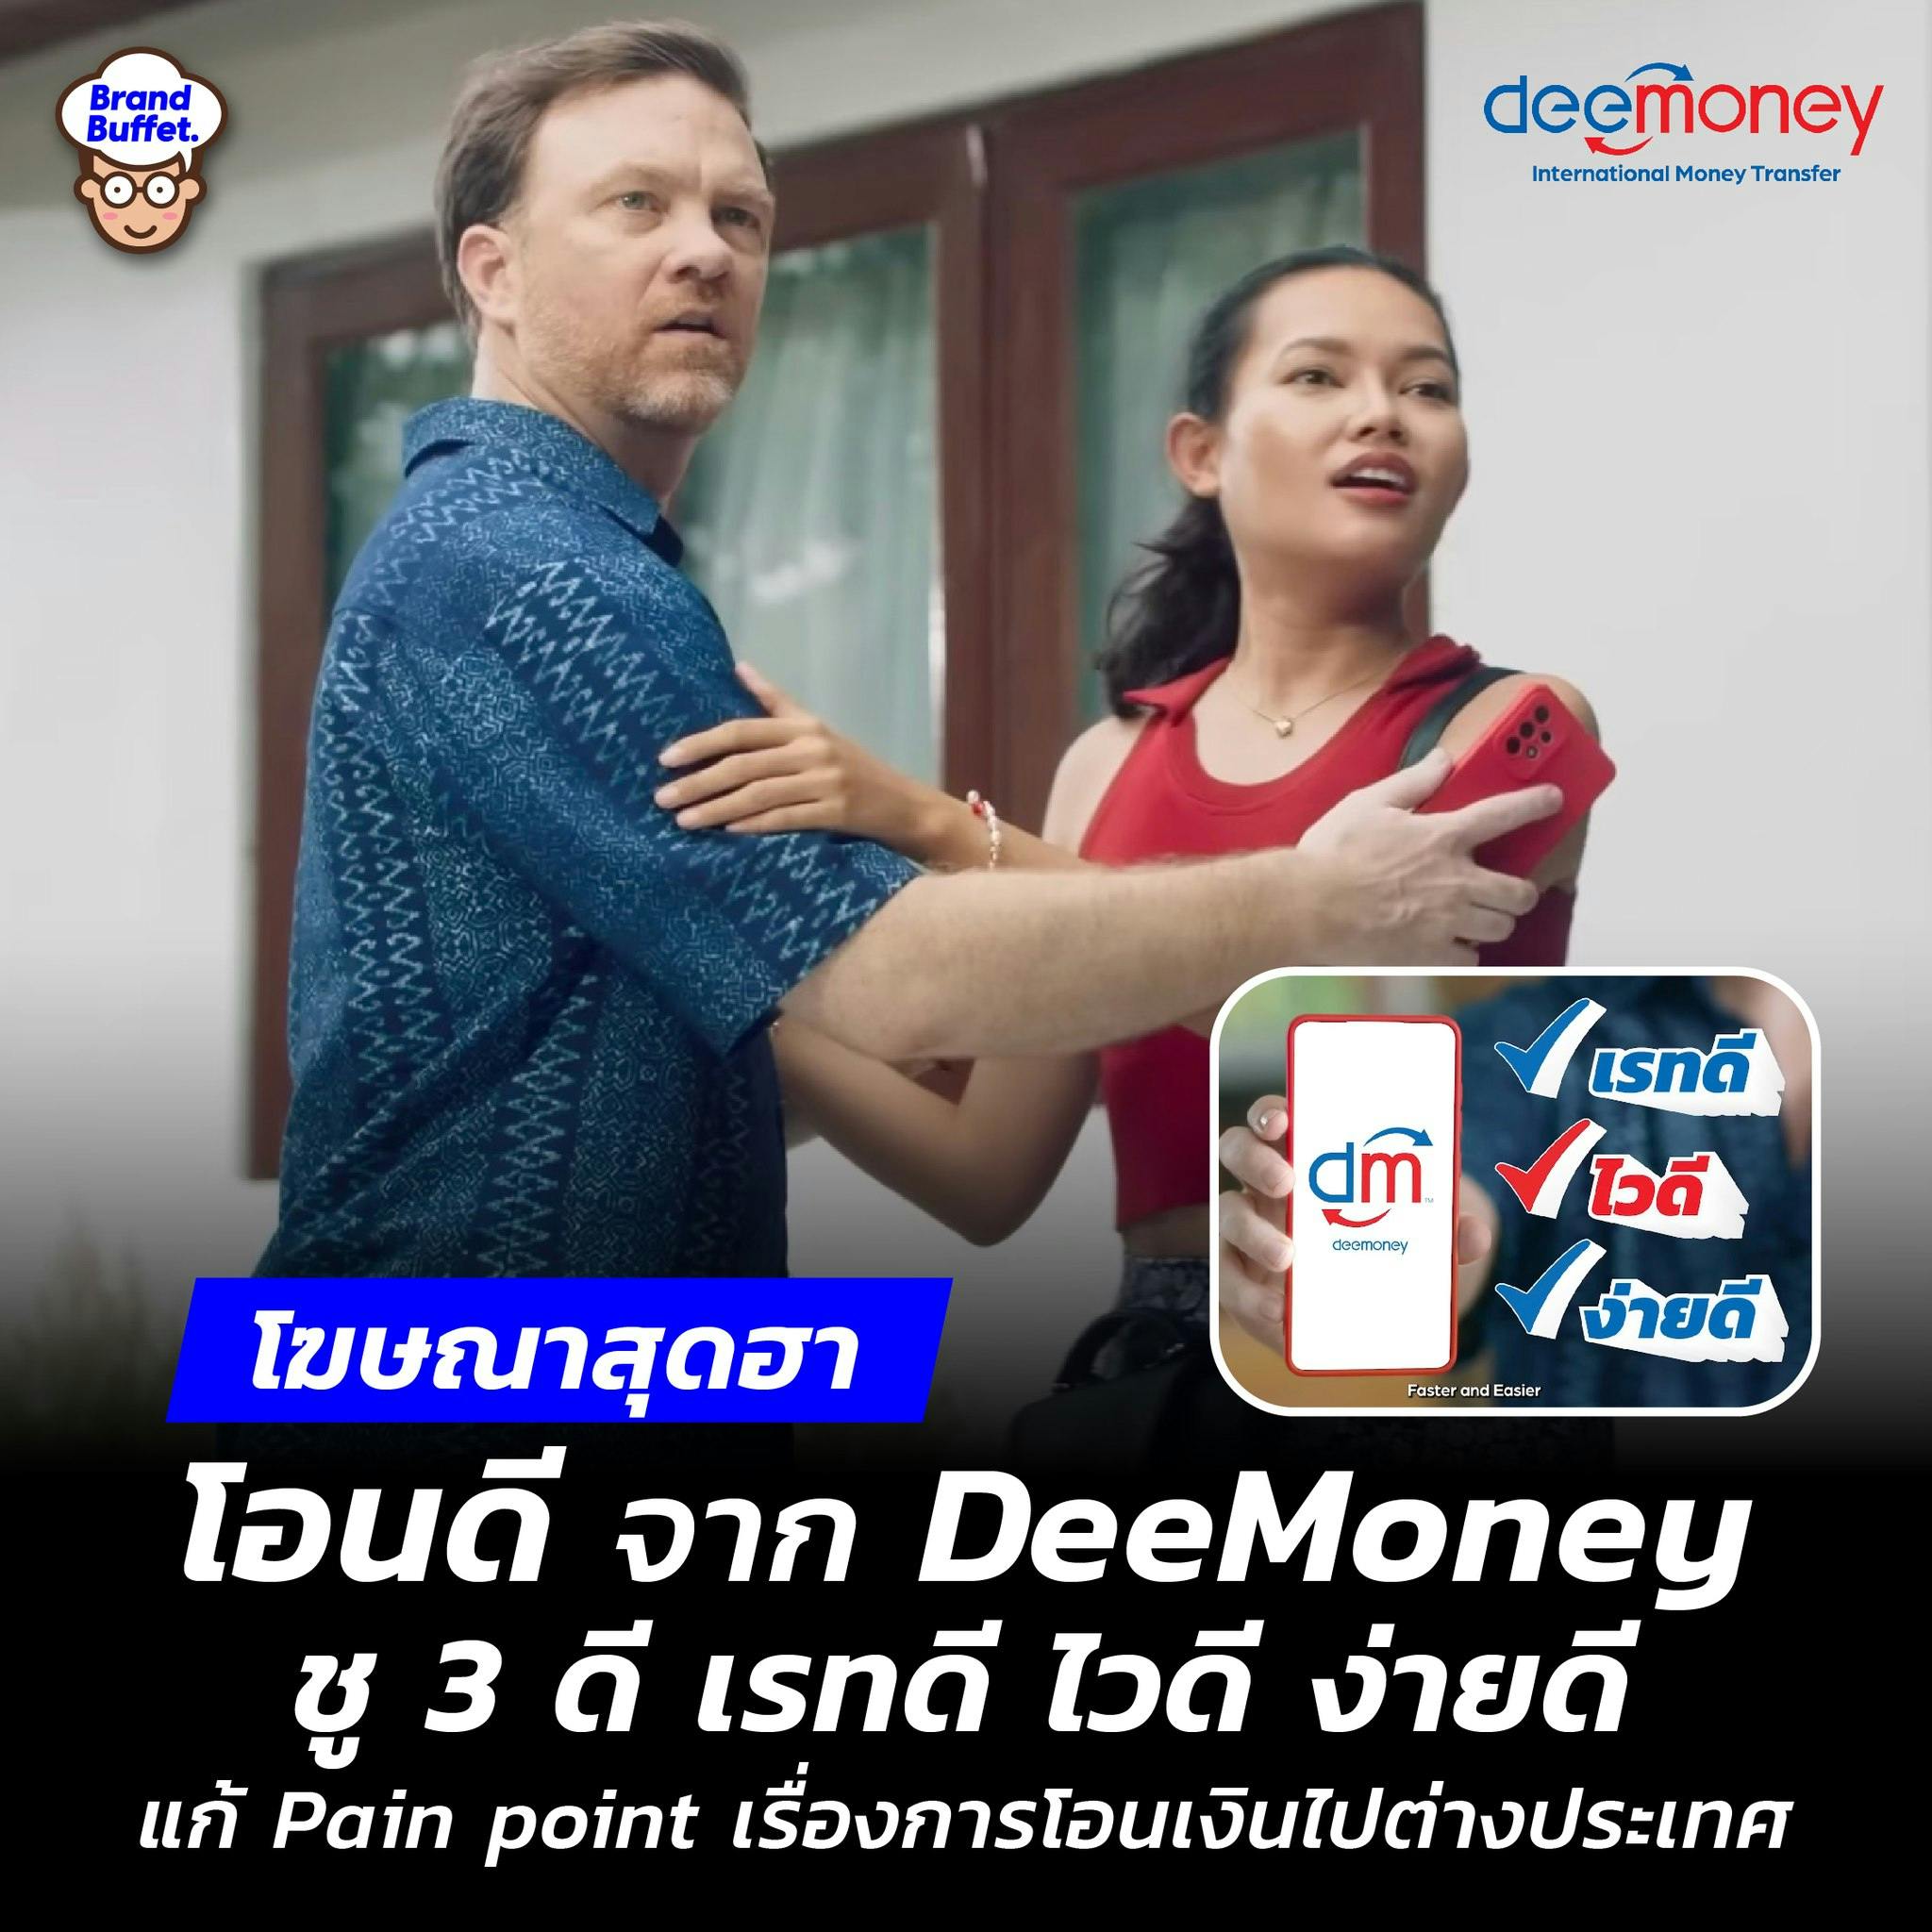 Dive into DeeMoney's 'OWNDEE' Dramedy Advertisement, Emphasizing Better Rates, Speed, and Simplicity while Addressing Pain Points in International Money Transfers